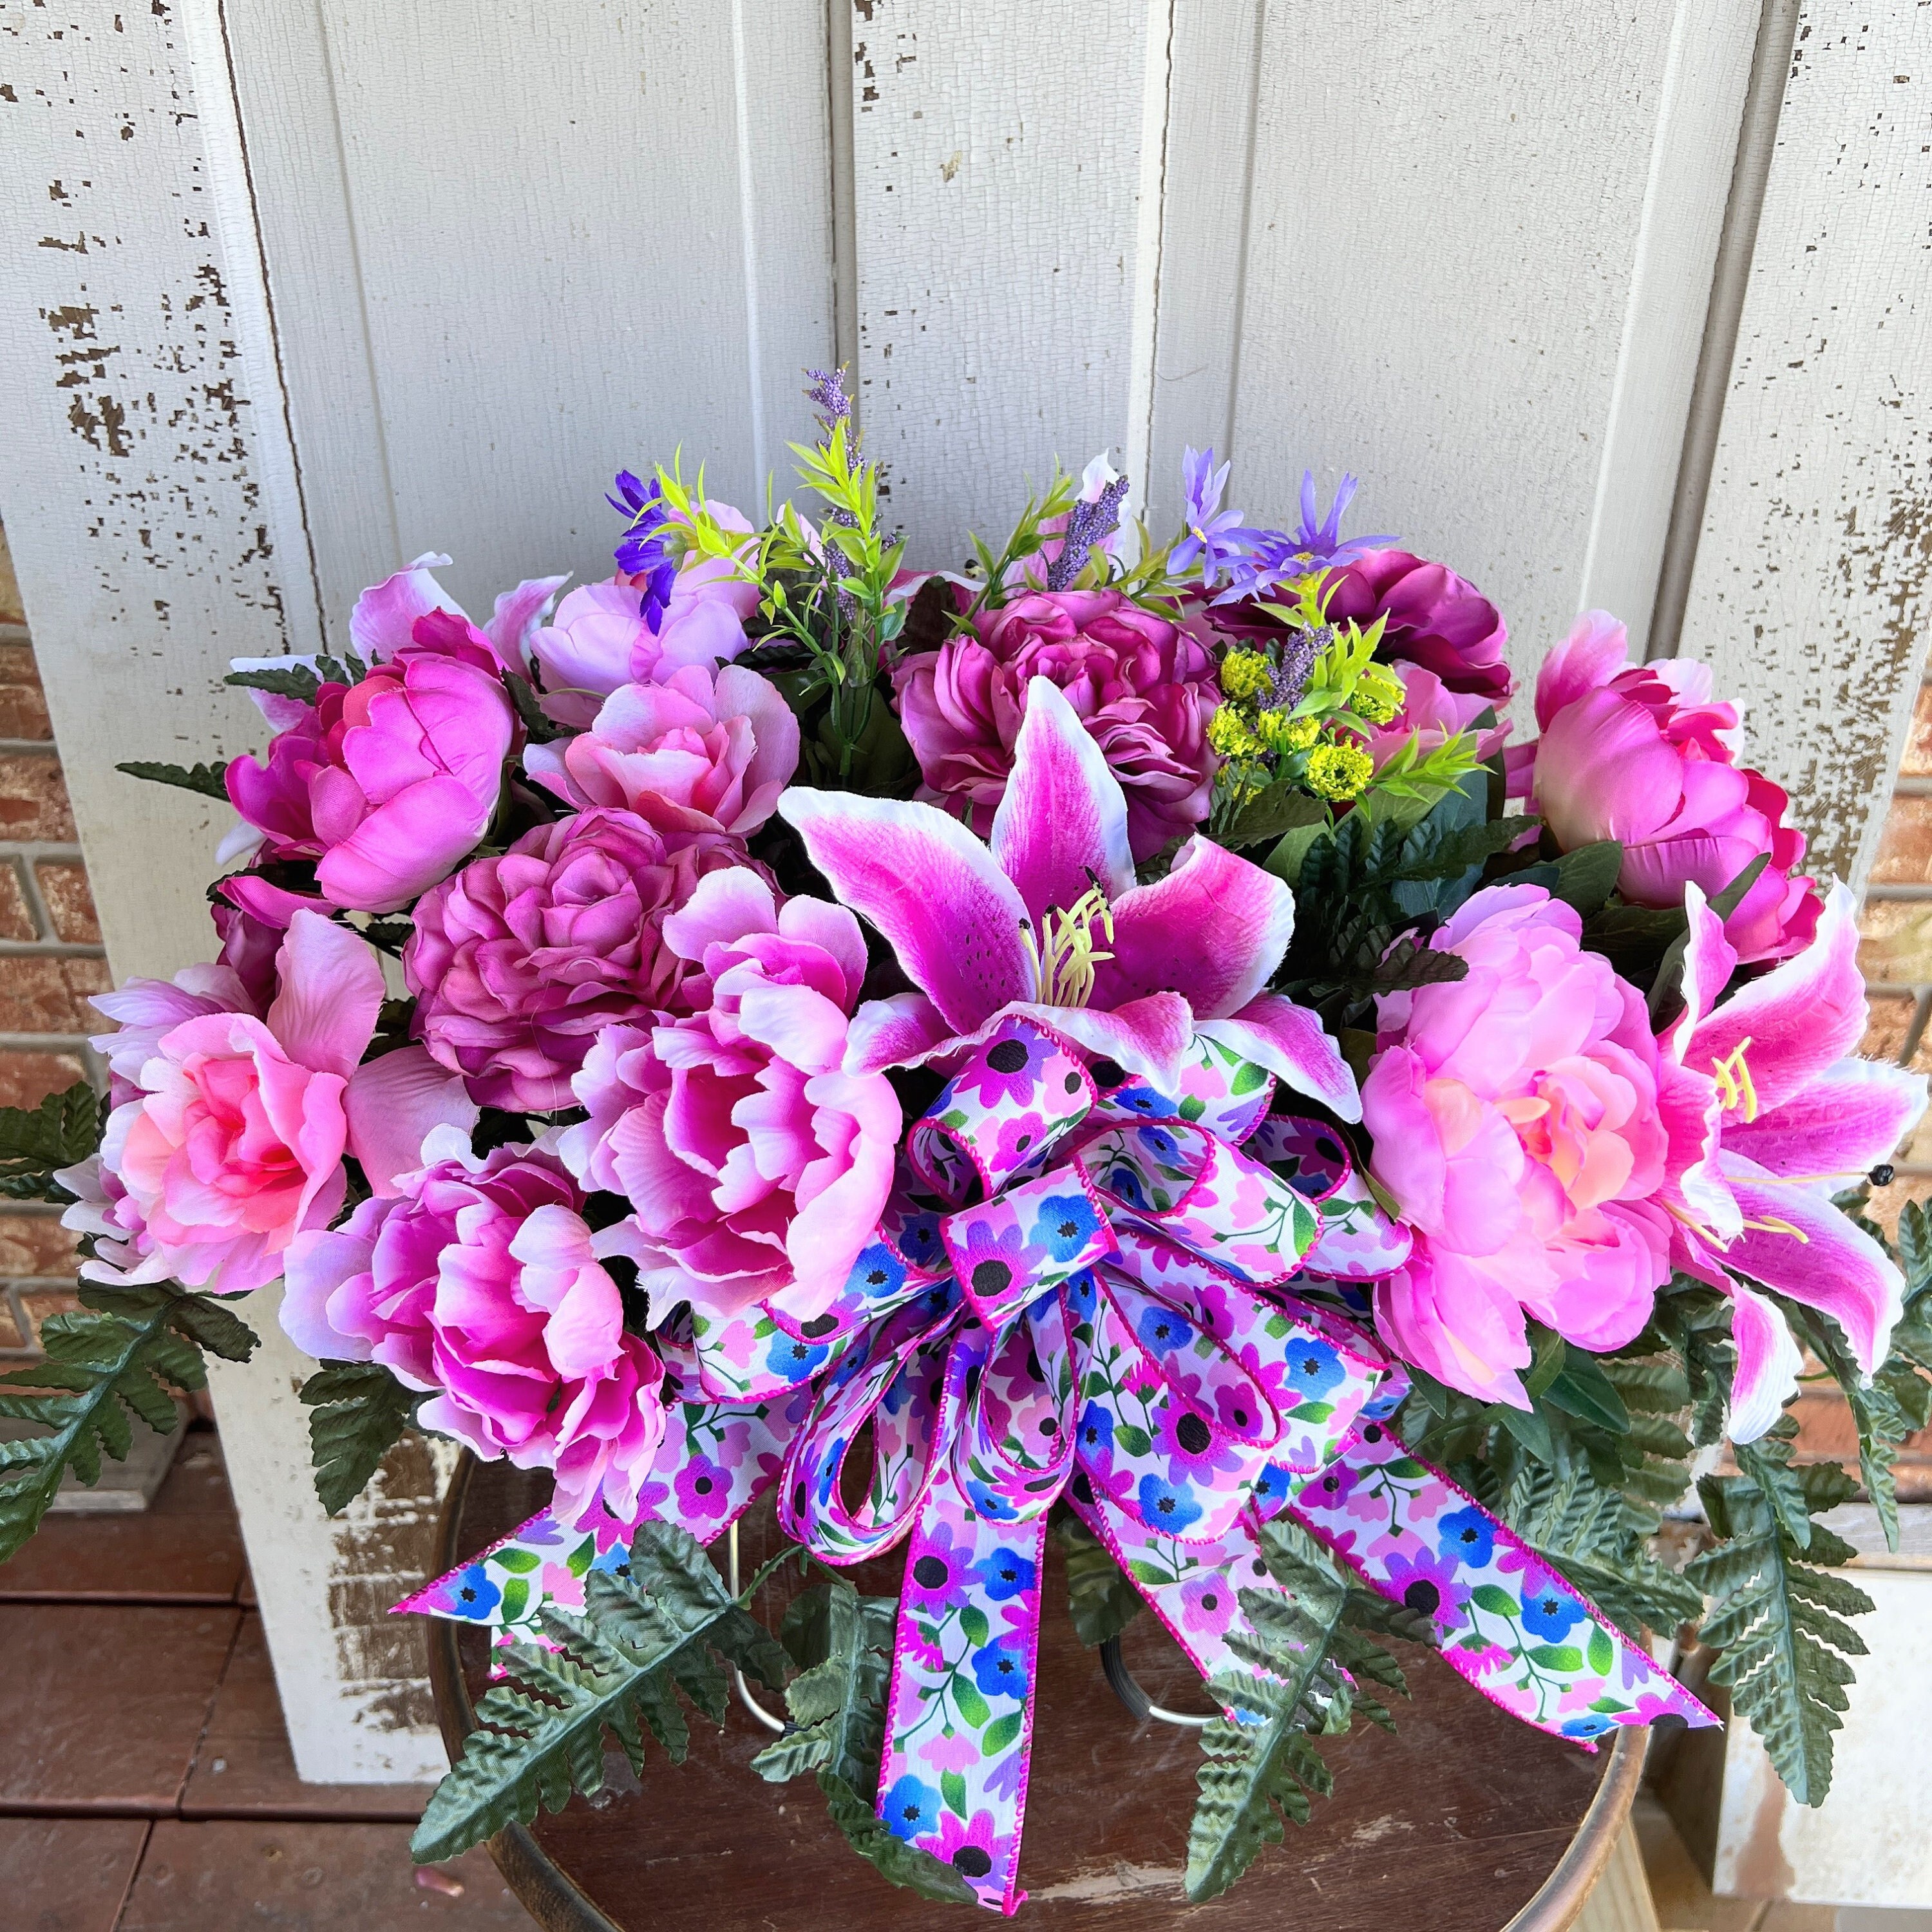 Purple Artificial Flowers for Cemetery with 2 Cone Vases, Small Bouquets  for Grave Decorations (8.6 x 13 Inches, 6 Bundles)